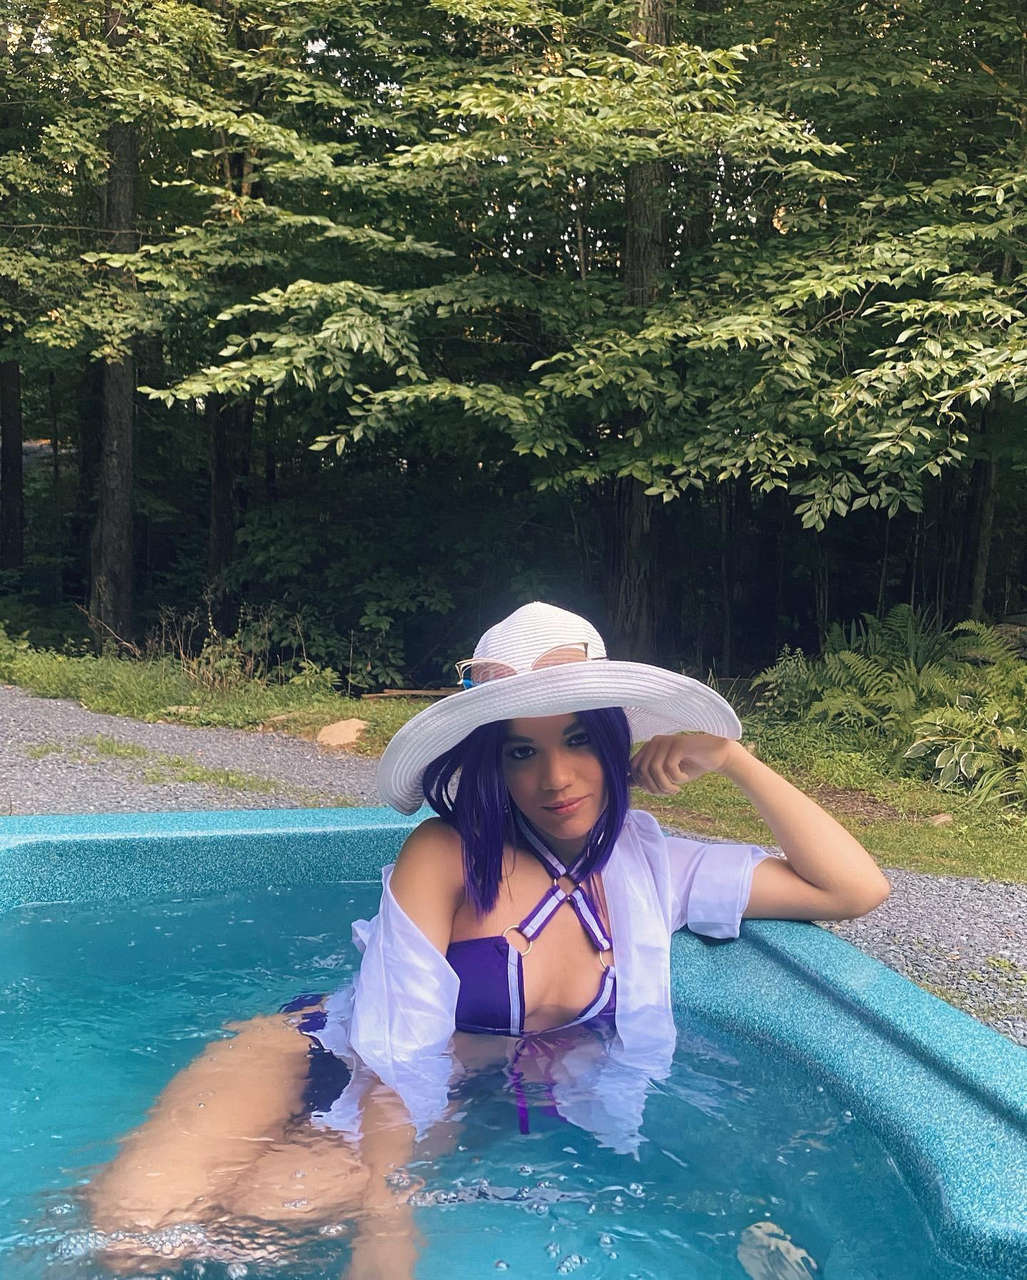 Pool Party Caitlyn From League Of Legends By Lizzylooper 00